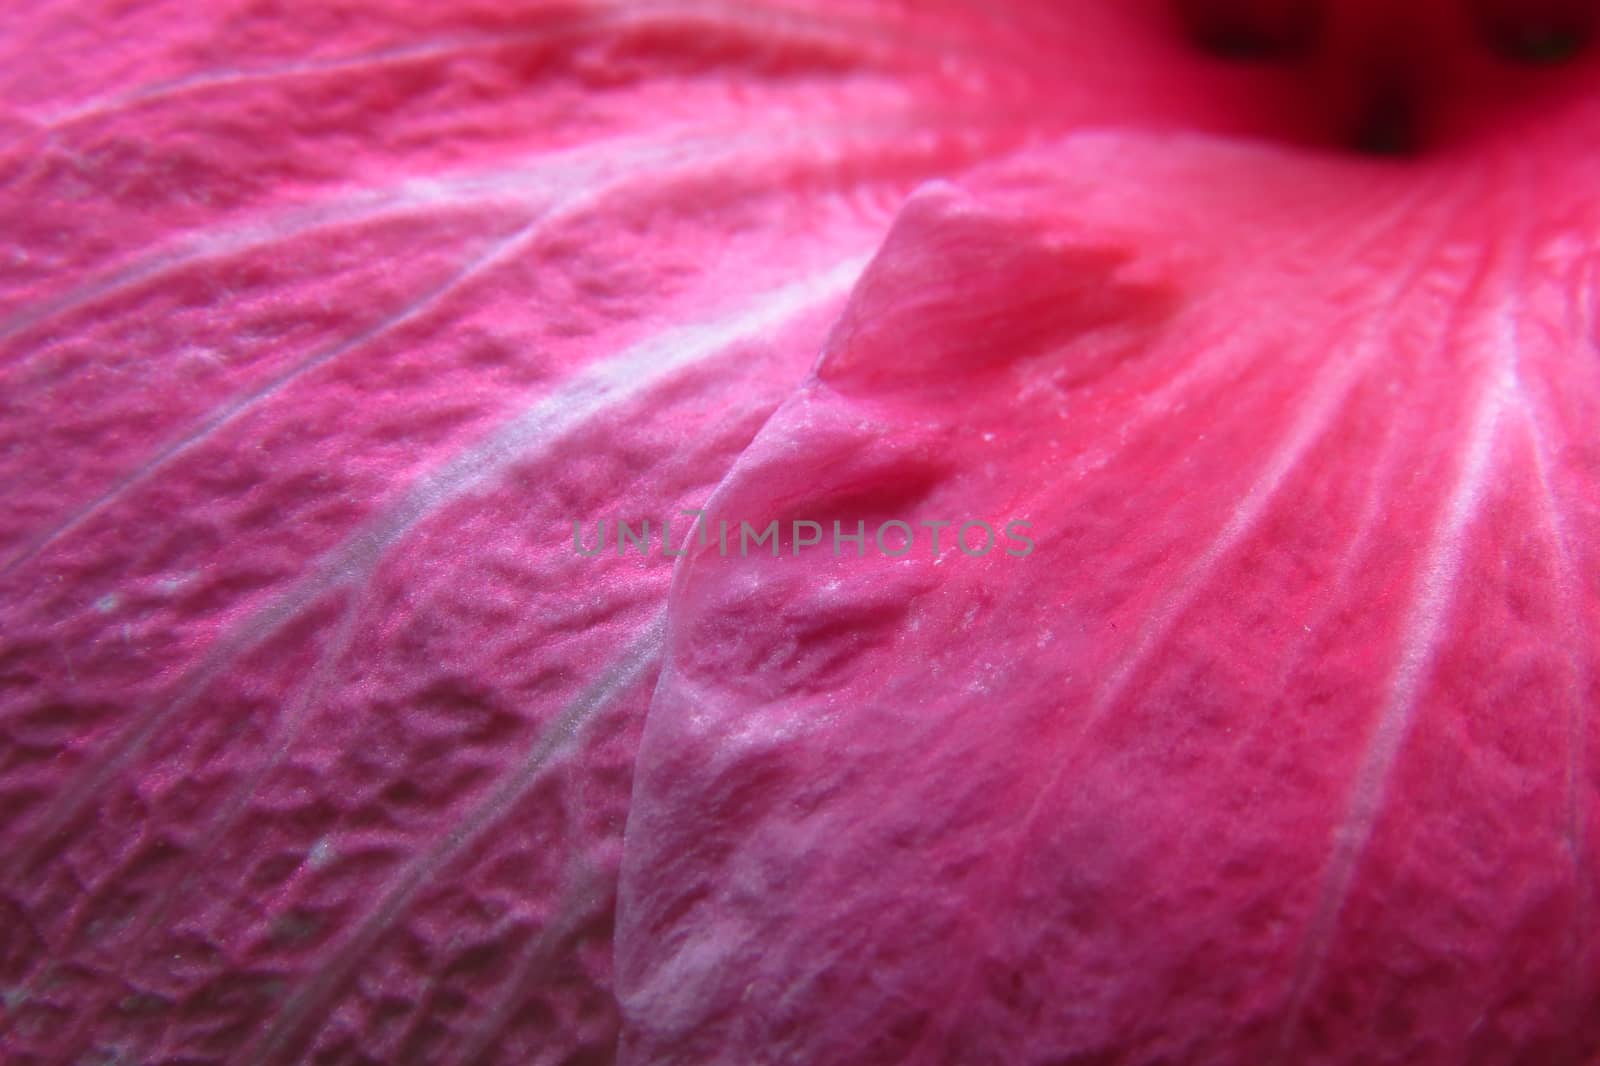 A background of beautiful petal texture of a pink flower showing its detail veins structure